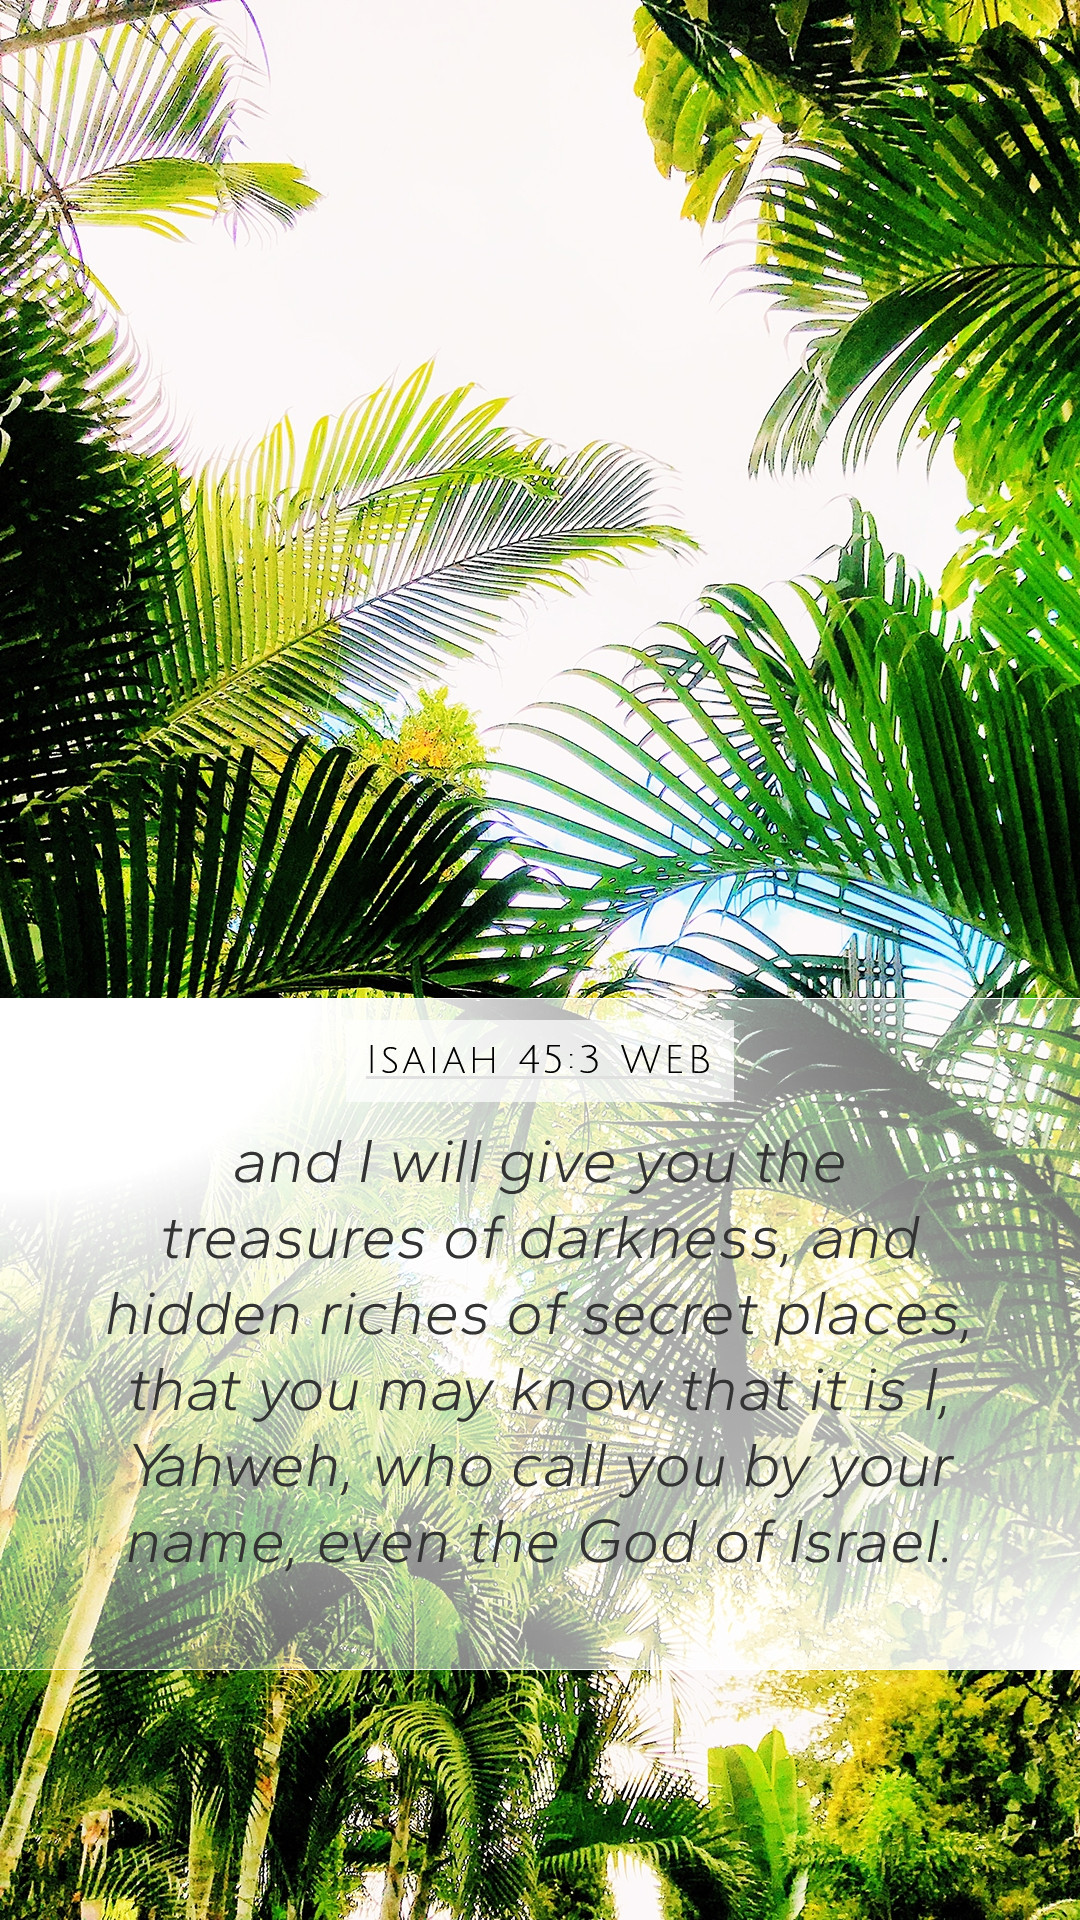 Isaiah 45:3 WEB Mobile Phone Wallpaper I will give you the treasures of darkness